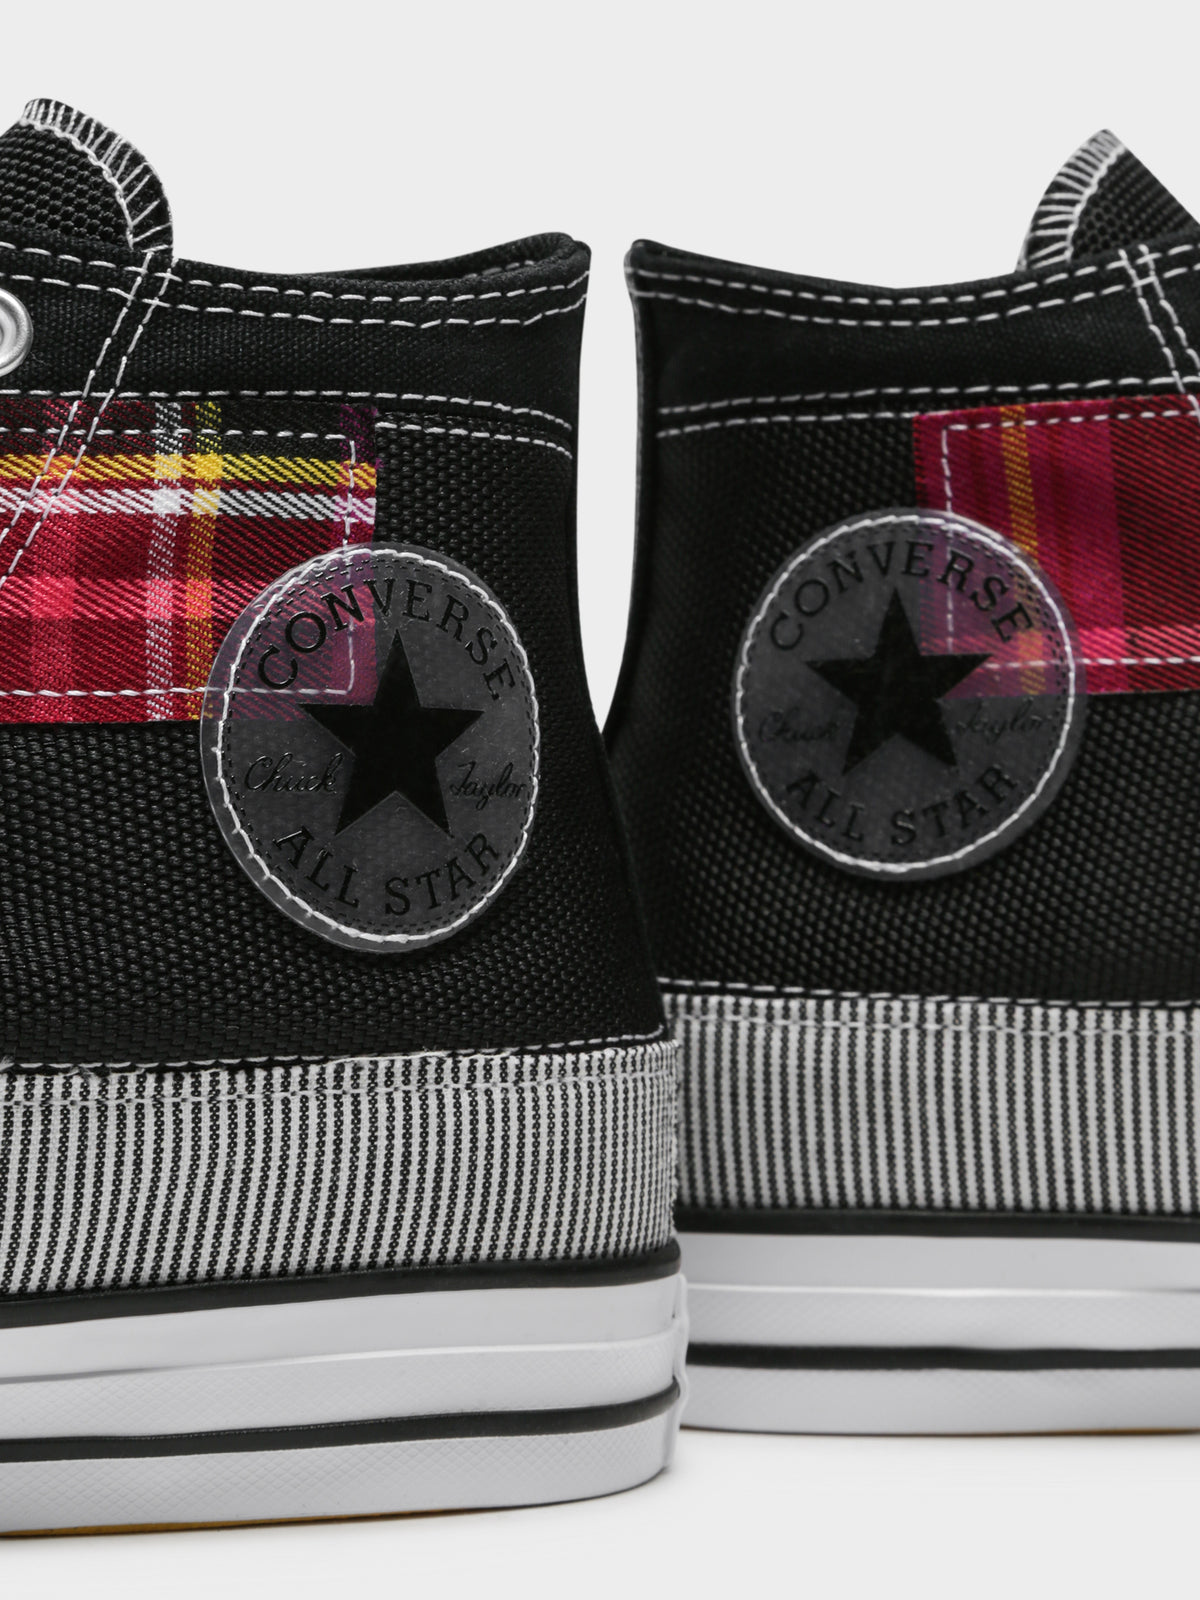 Unisex Converse Chuck Taylor All Star Patchwork High Top Sneakers in Black